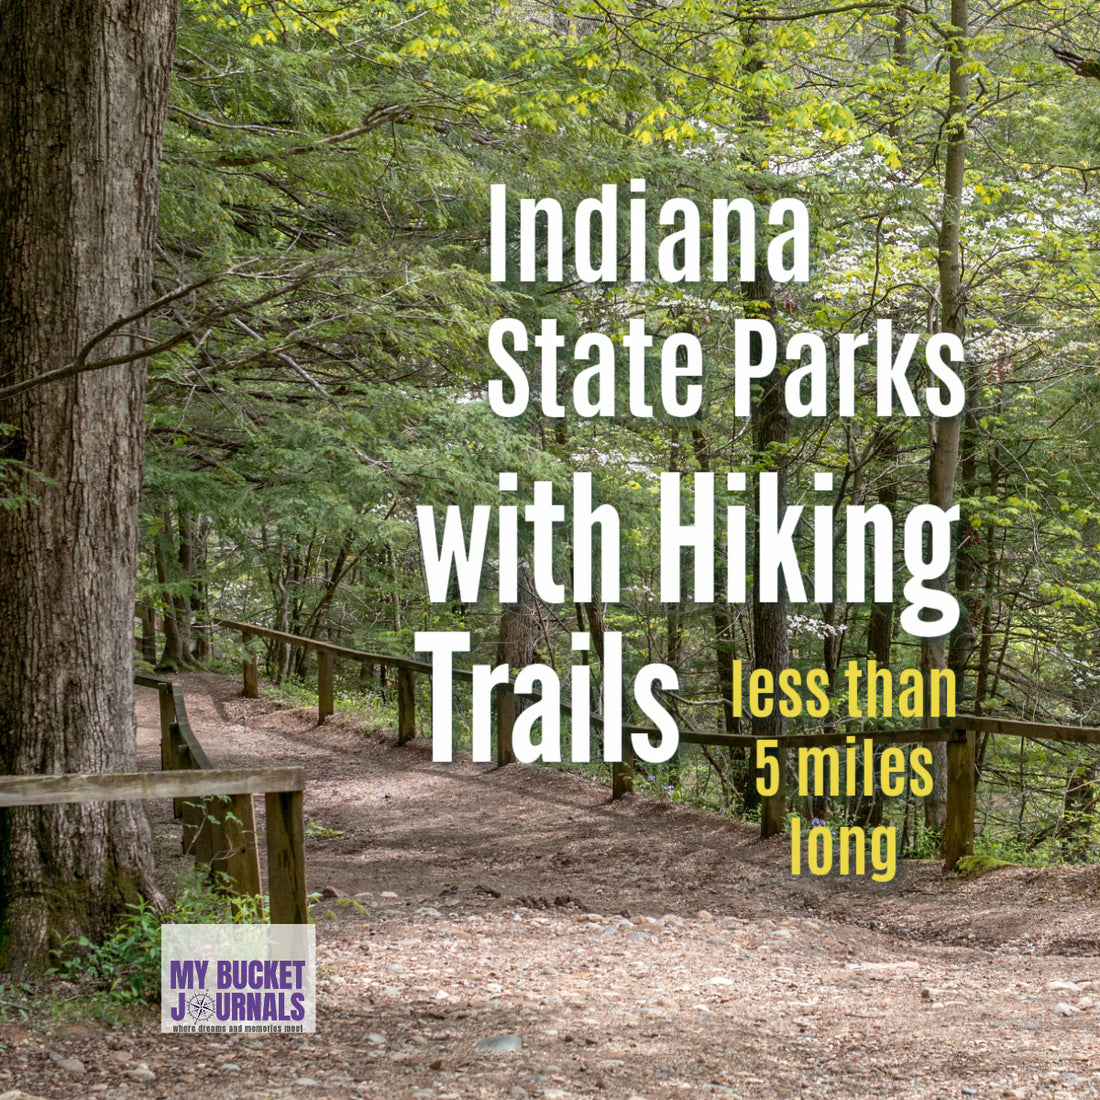 a hiking trail in a wooded area with a text overlay that says Indiana State Parks with Hiking Trails Less than 5 miles long